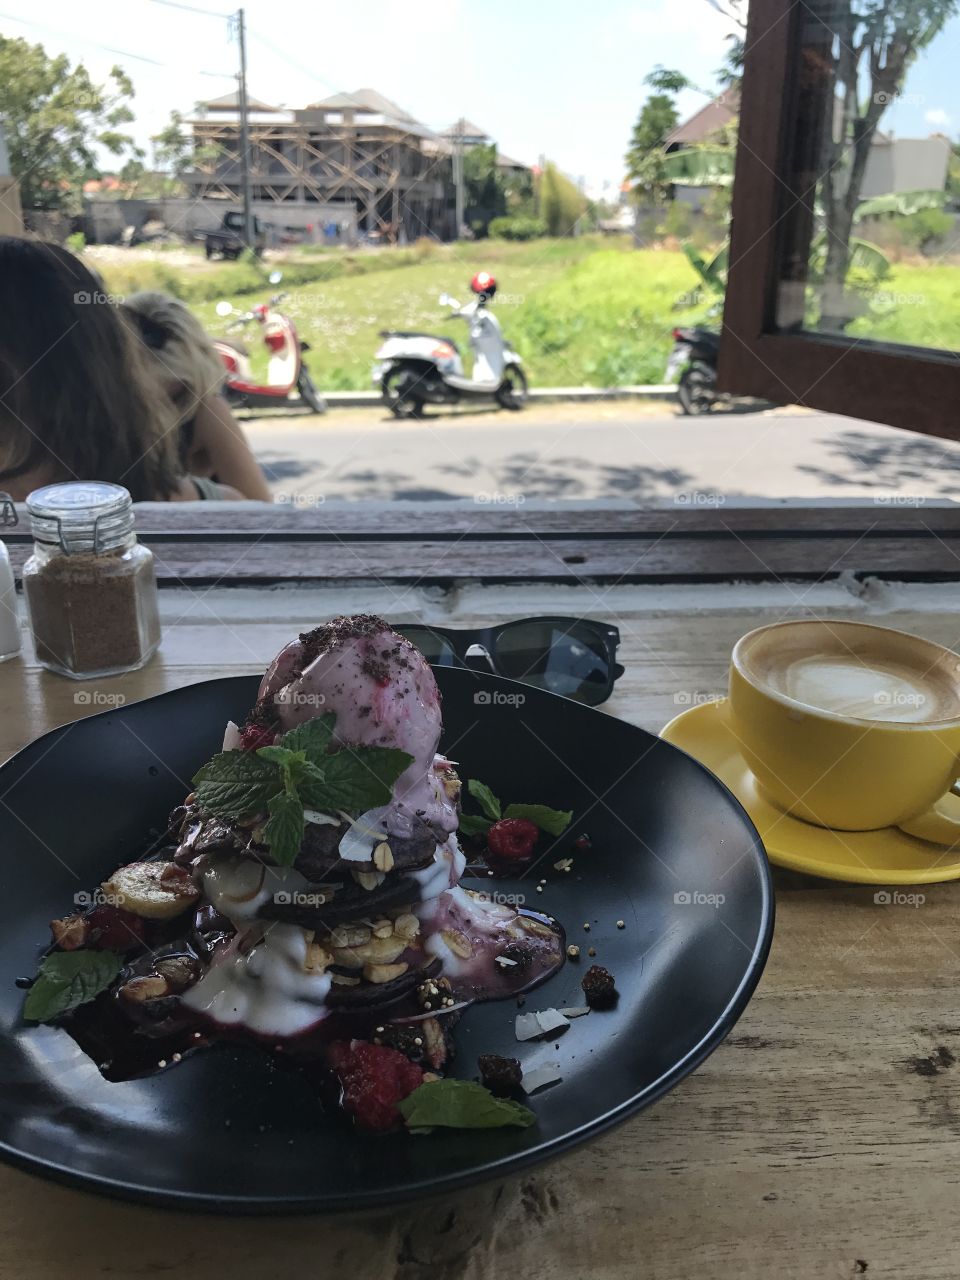 Coffee with ice cream pancakes in Bali